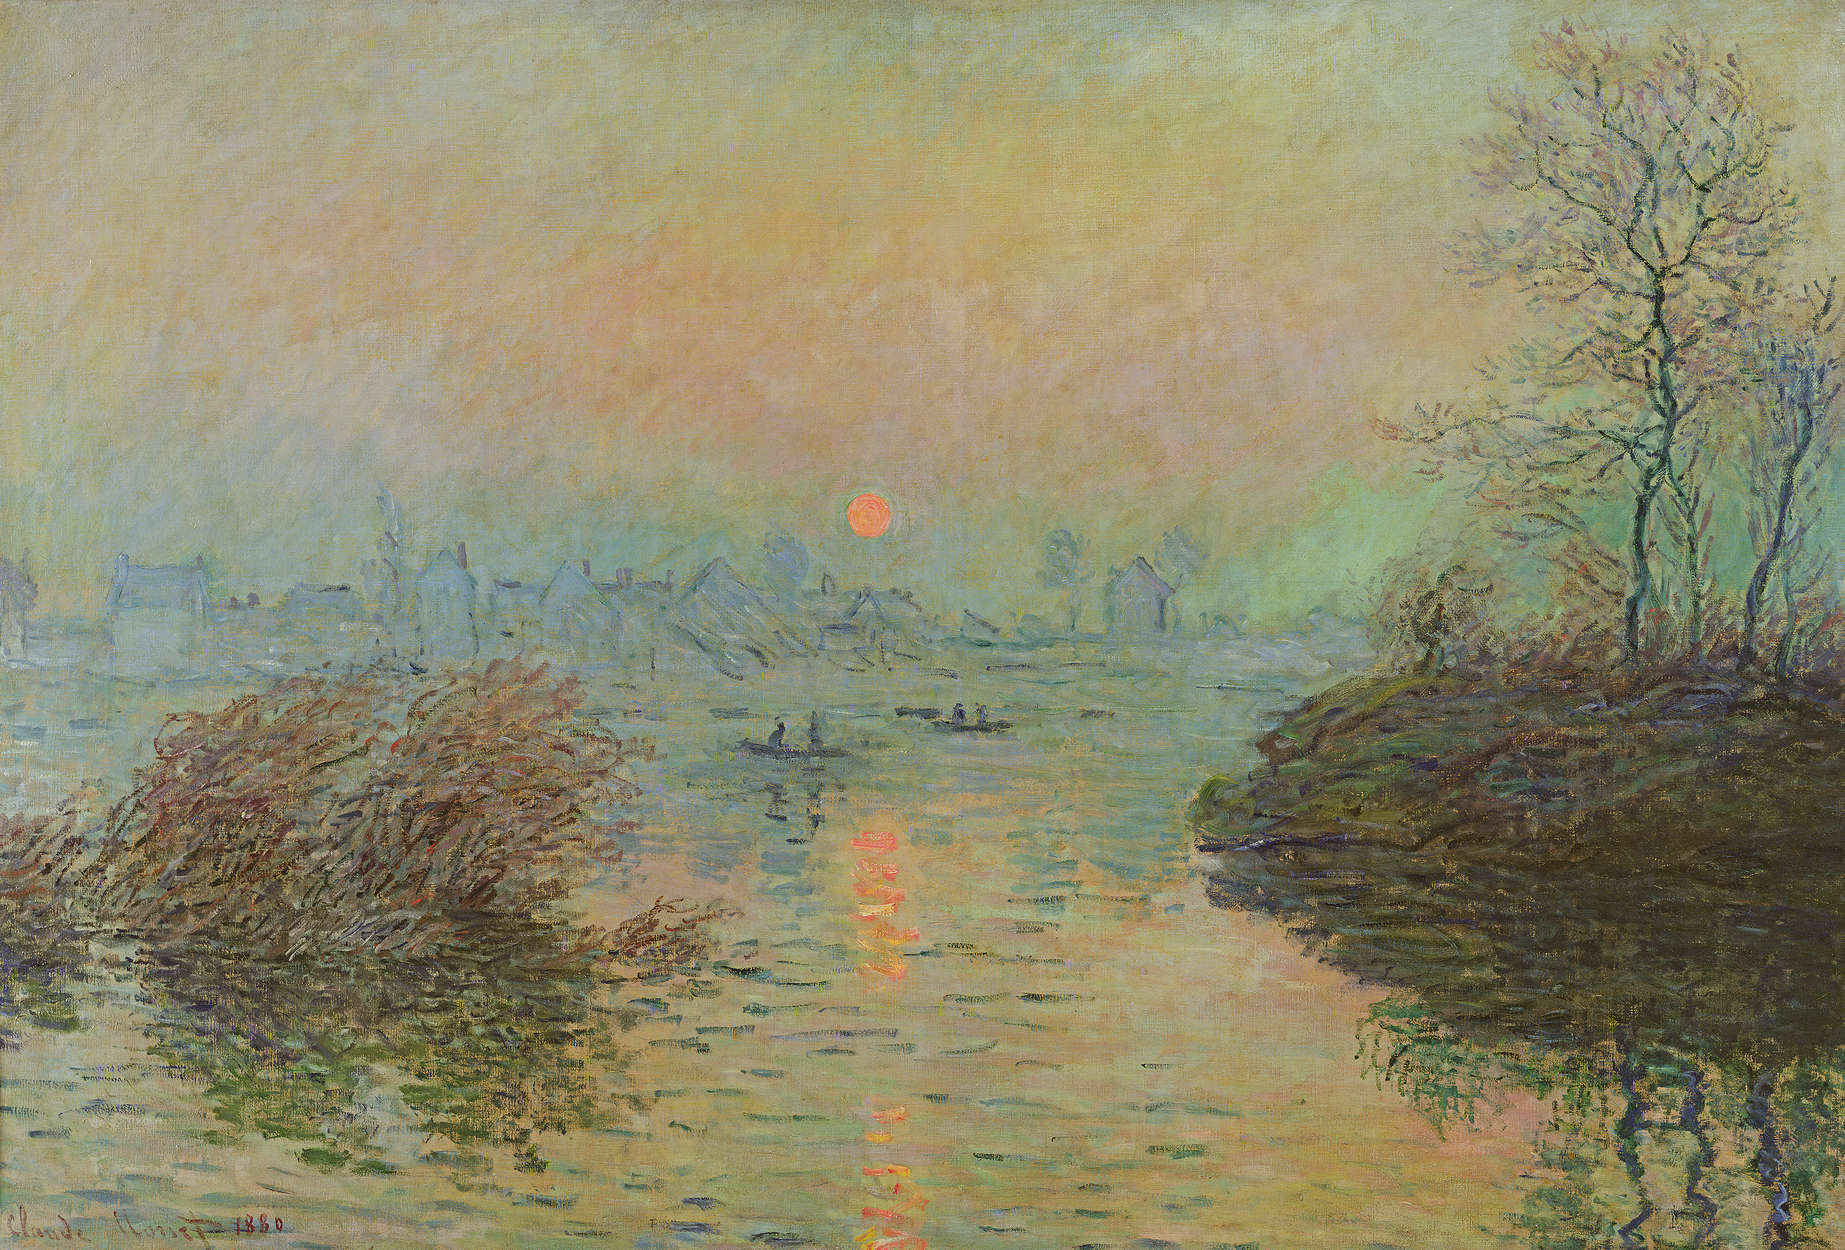             Photo wallpaper "Sunset over the Seine at Lavacourt" by Claude Monet
        